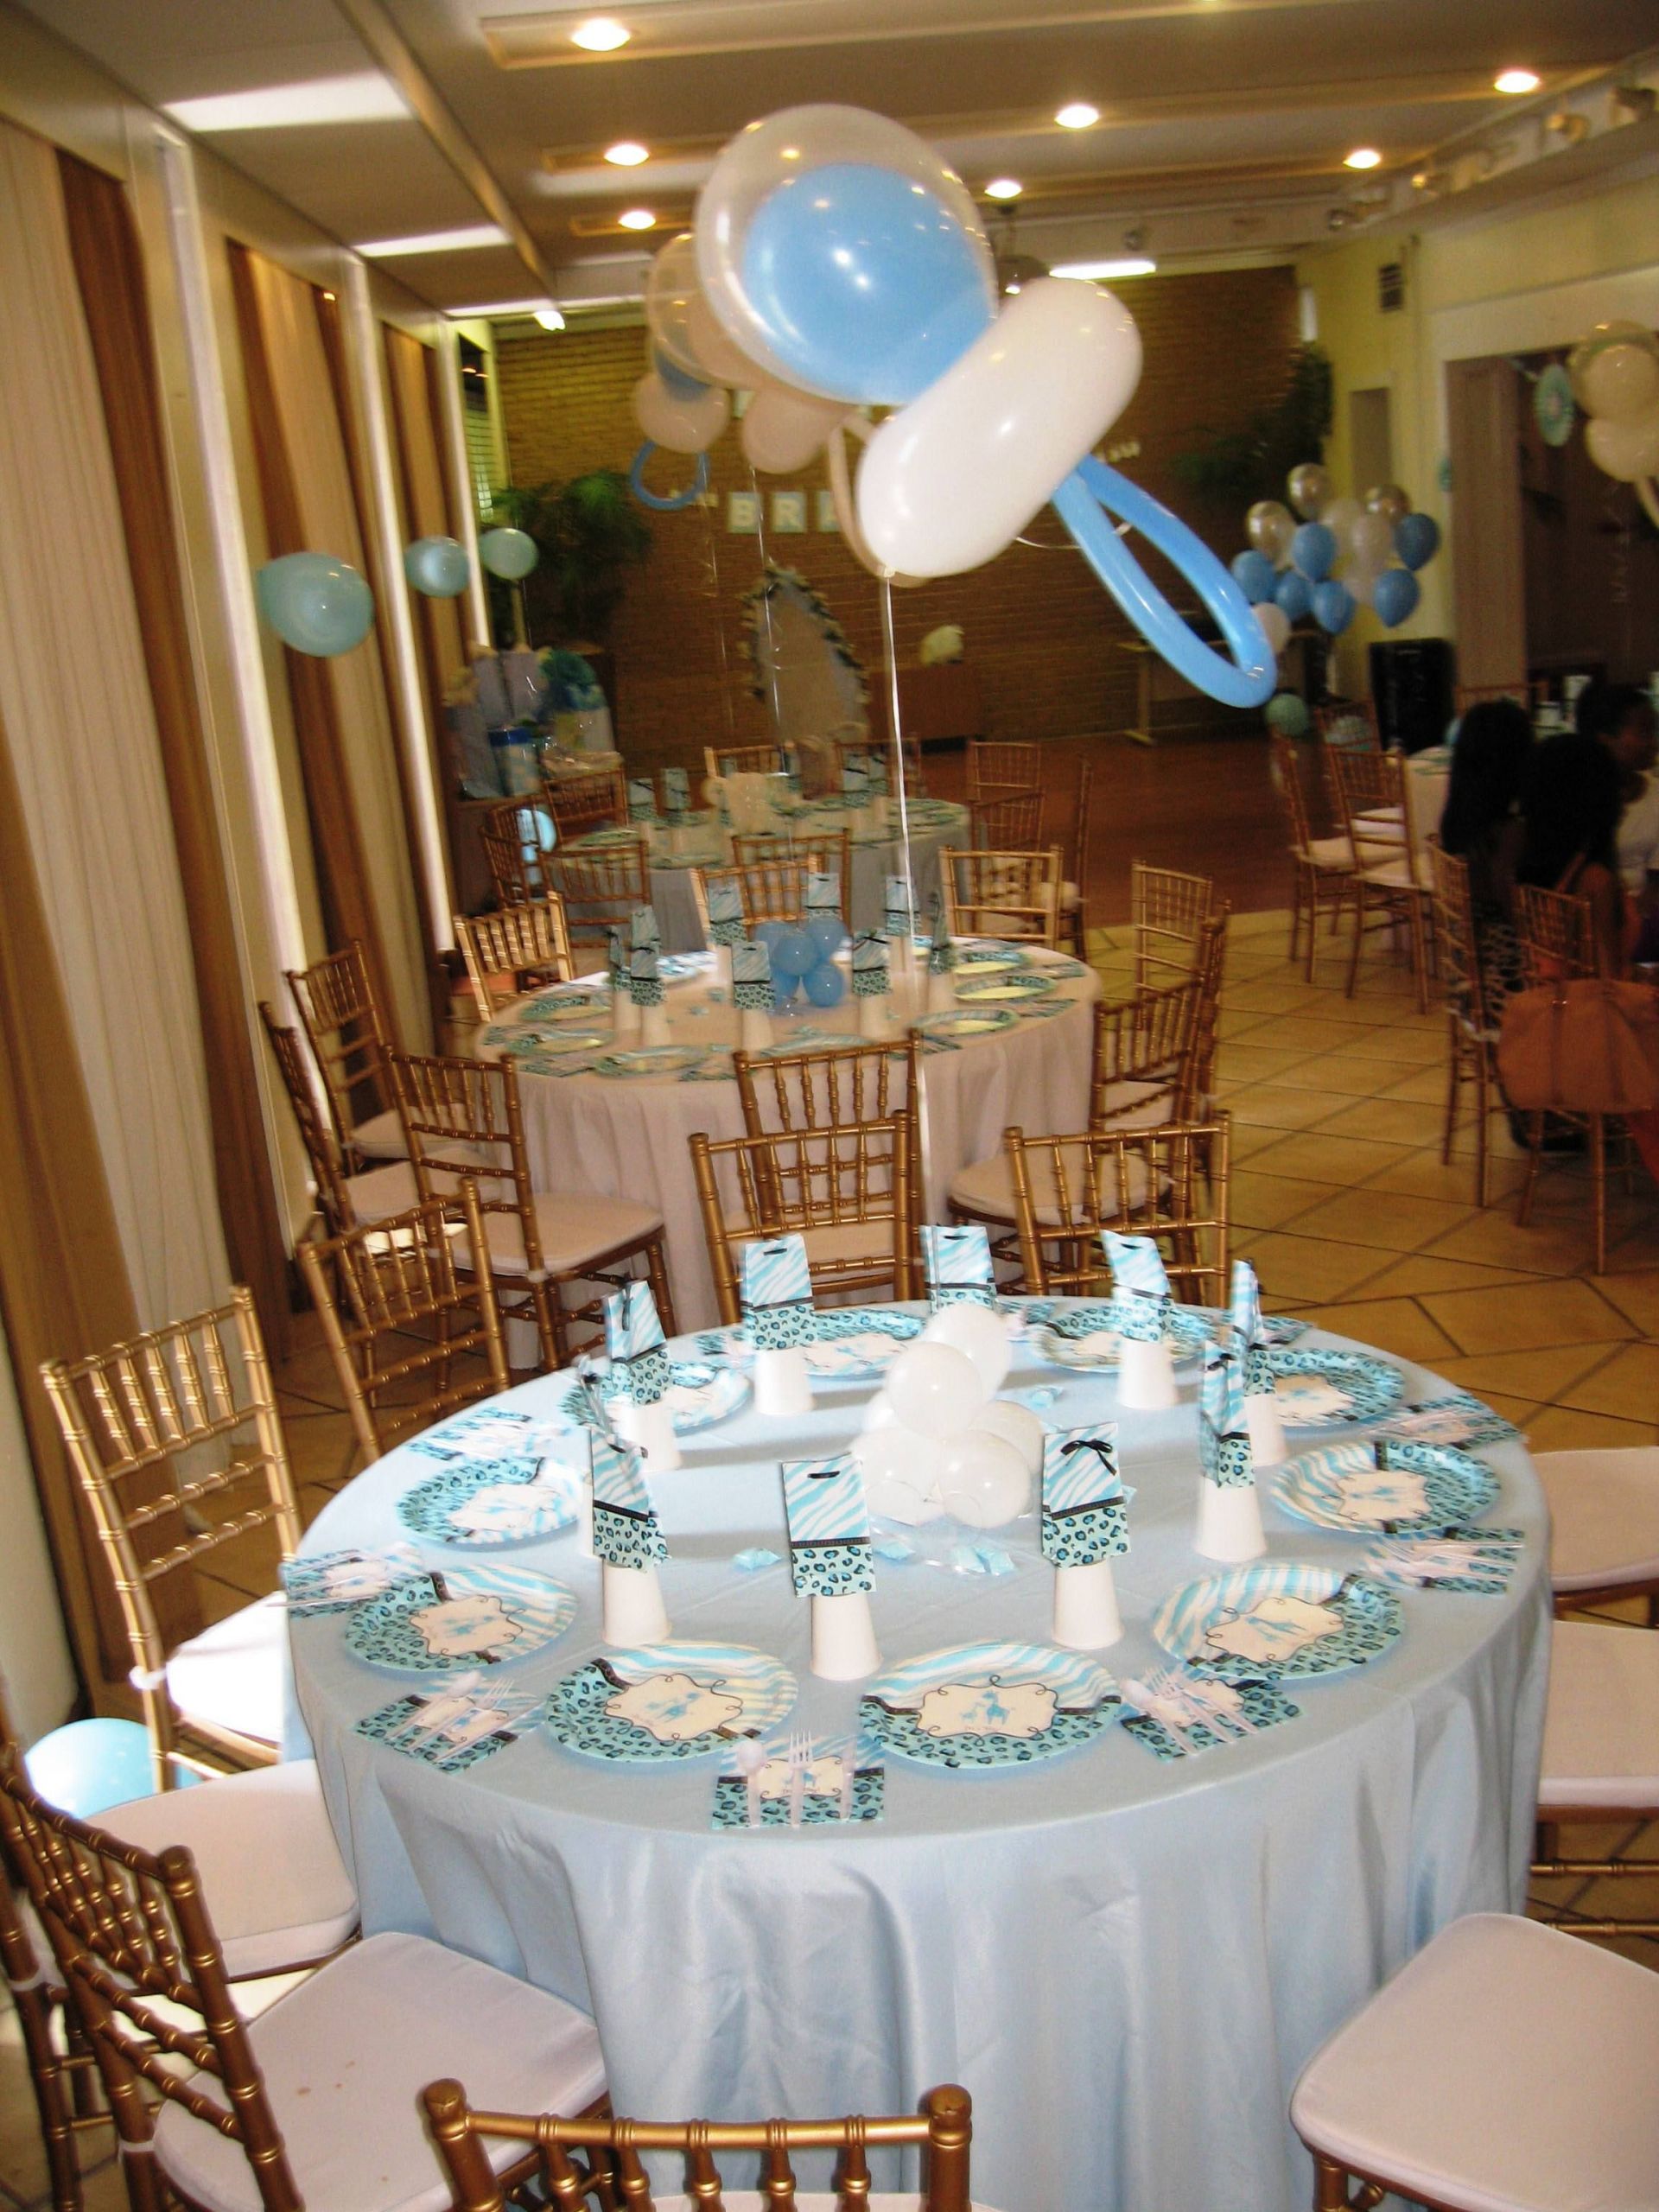 Boy Baby Shower Table Decoration Ideas
 Baby Shower Table Decor